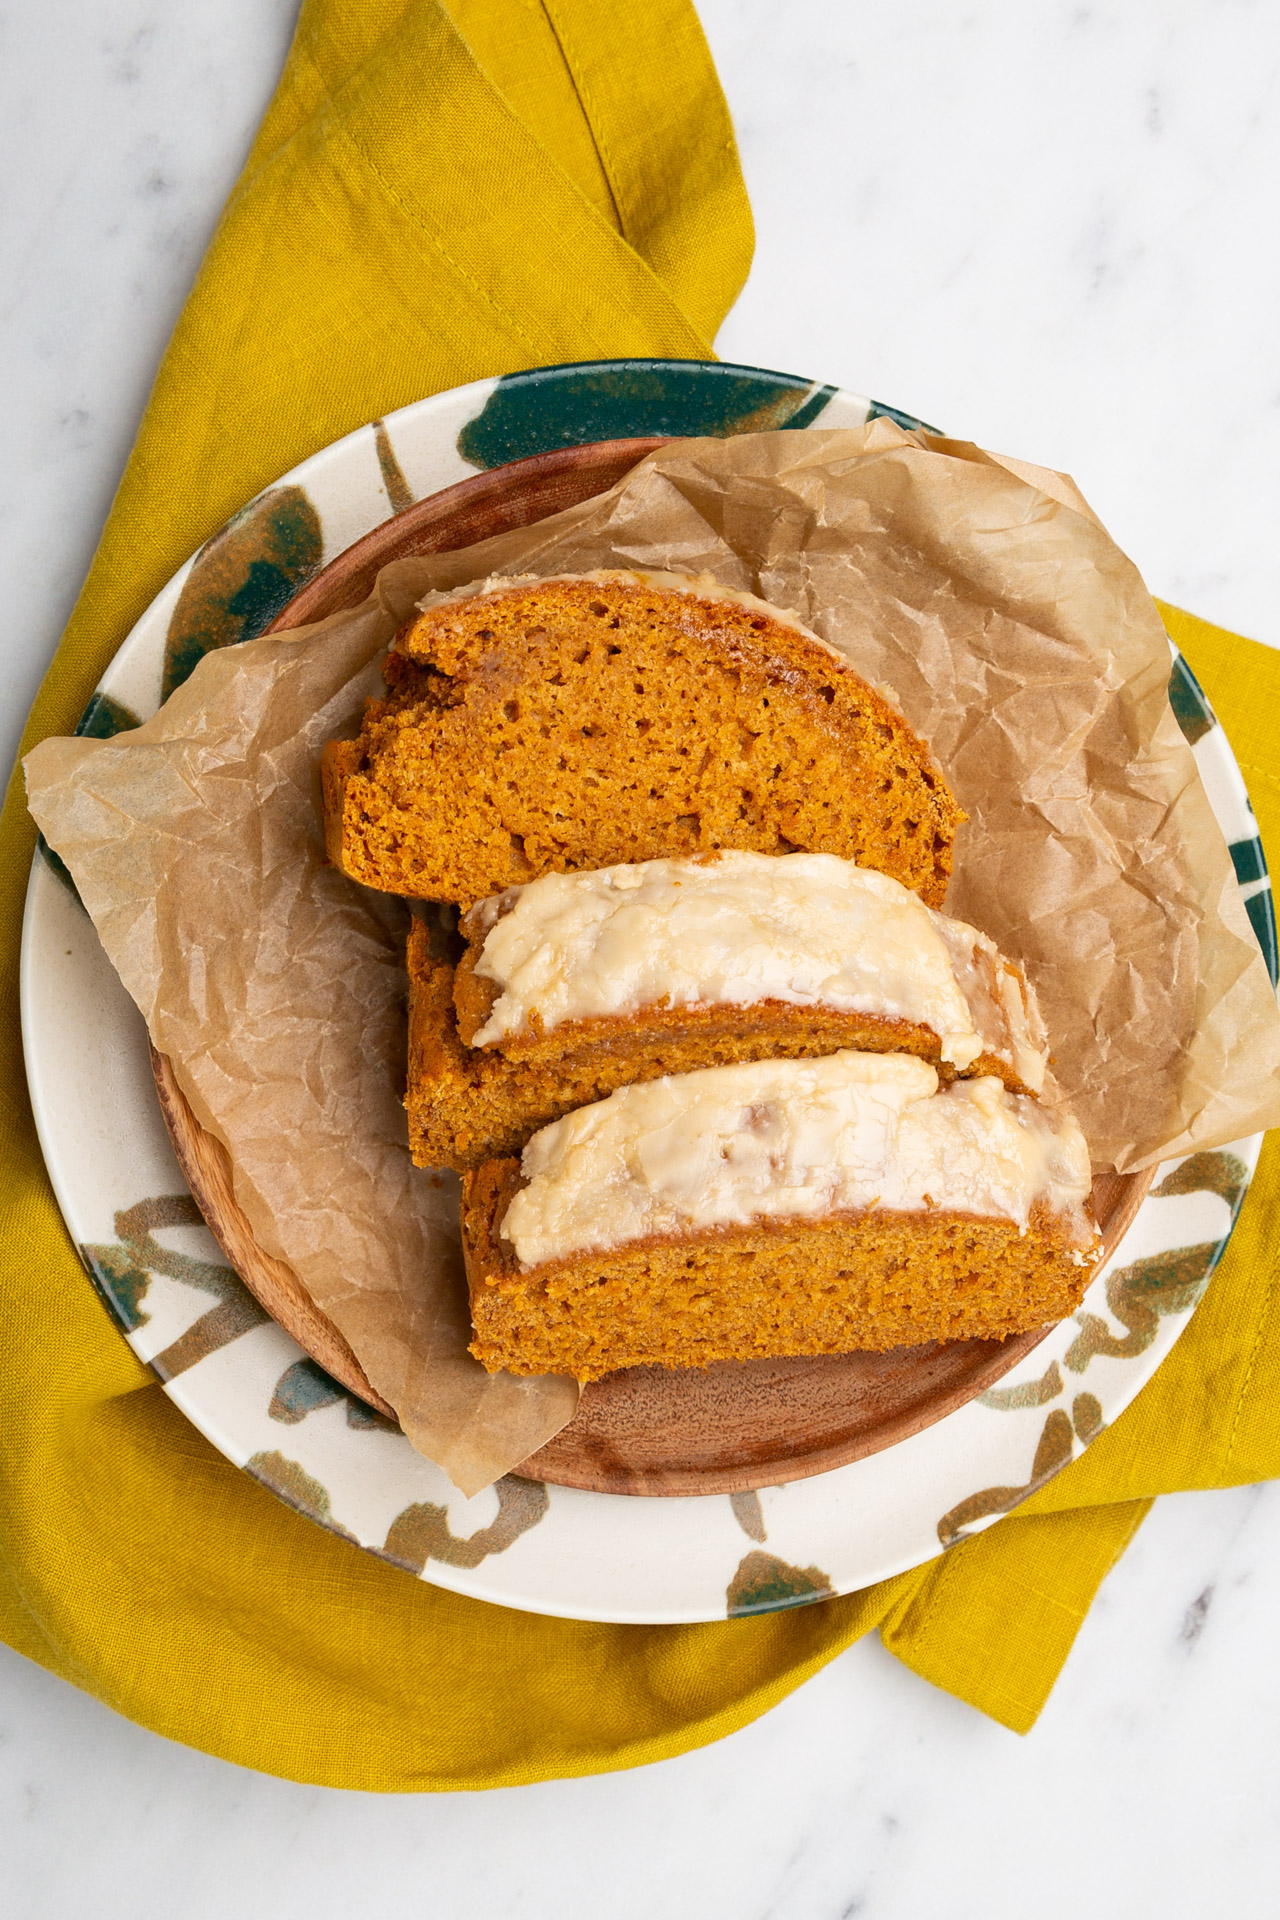 A slice of vegan pumpkin bread sprinkled with spices, served on a plate.